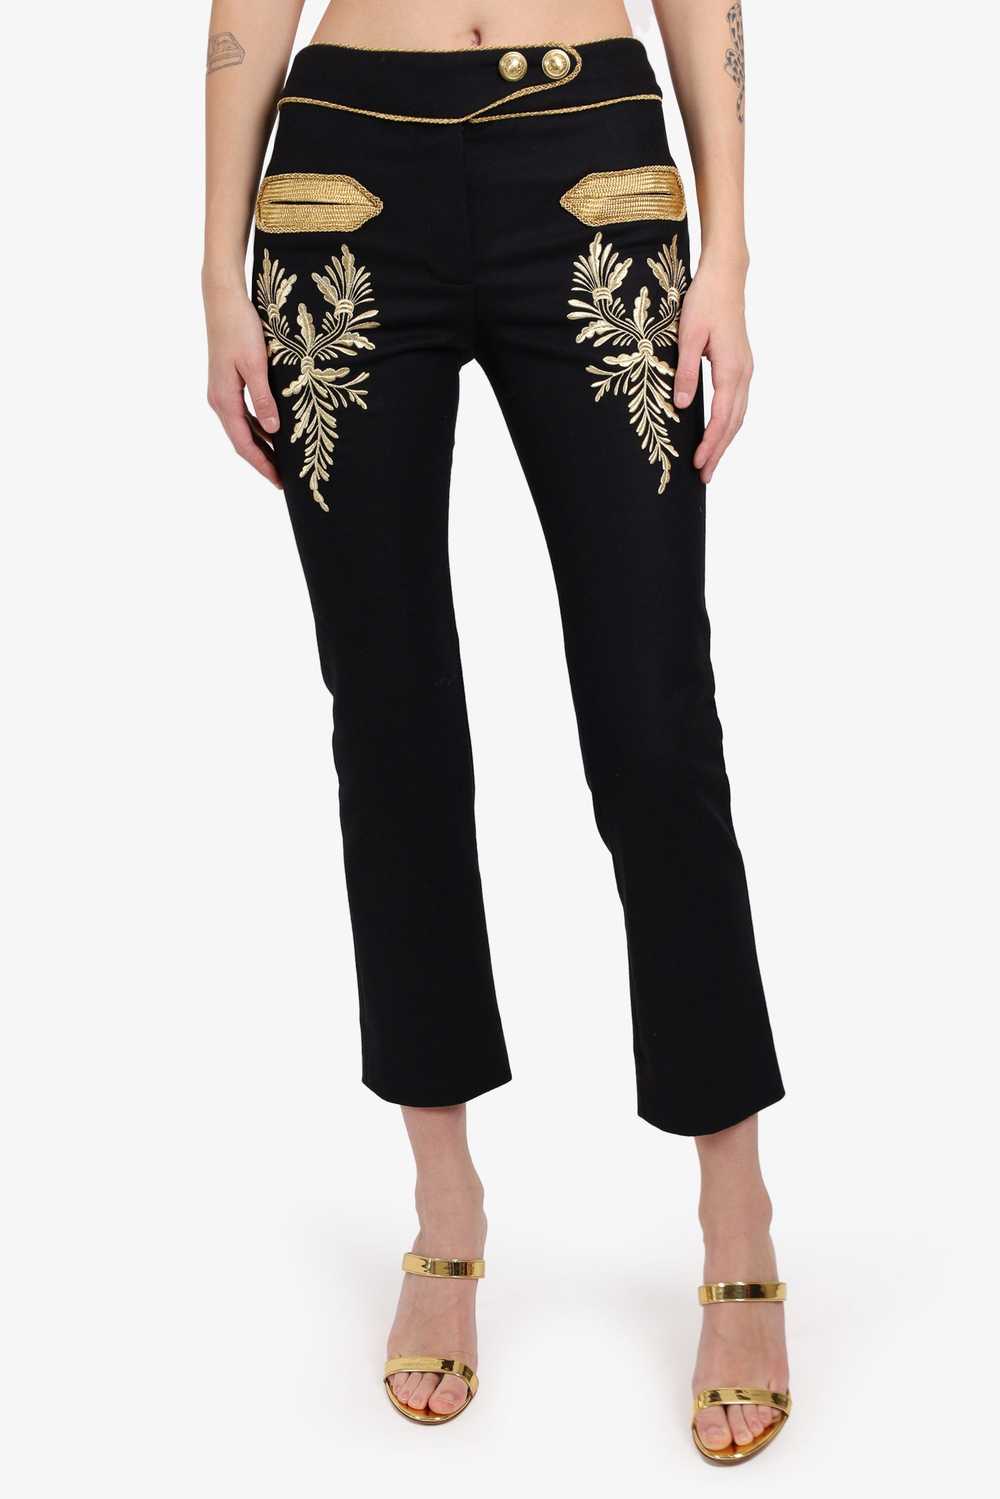 Paco Rabanne Black Wool Gold Embroidered Pants Si… - image 1